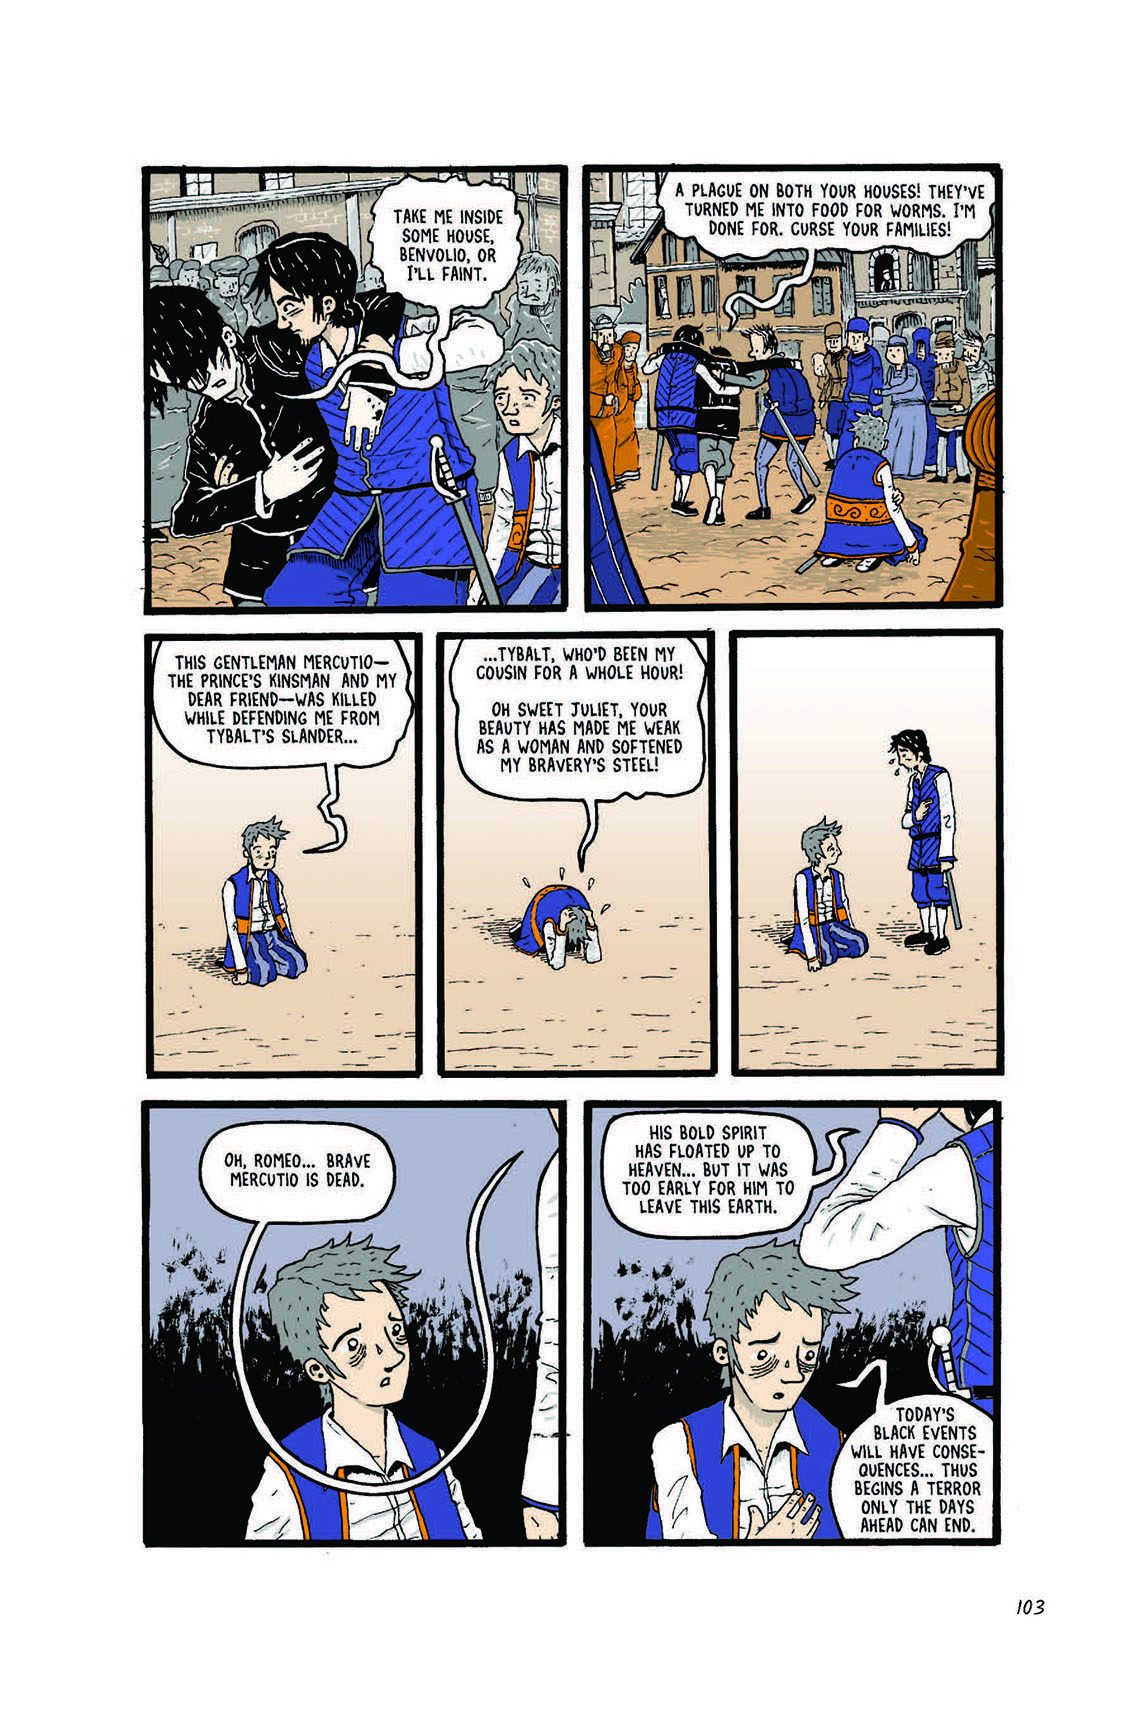 Romeo and Juliet Act 3 Scene 1 Page 103 Graphic Novel